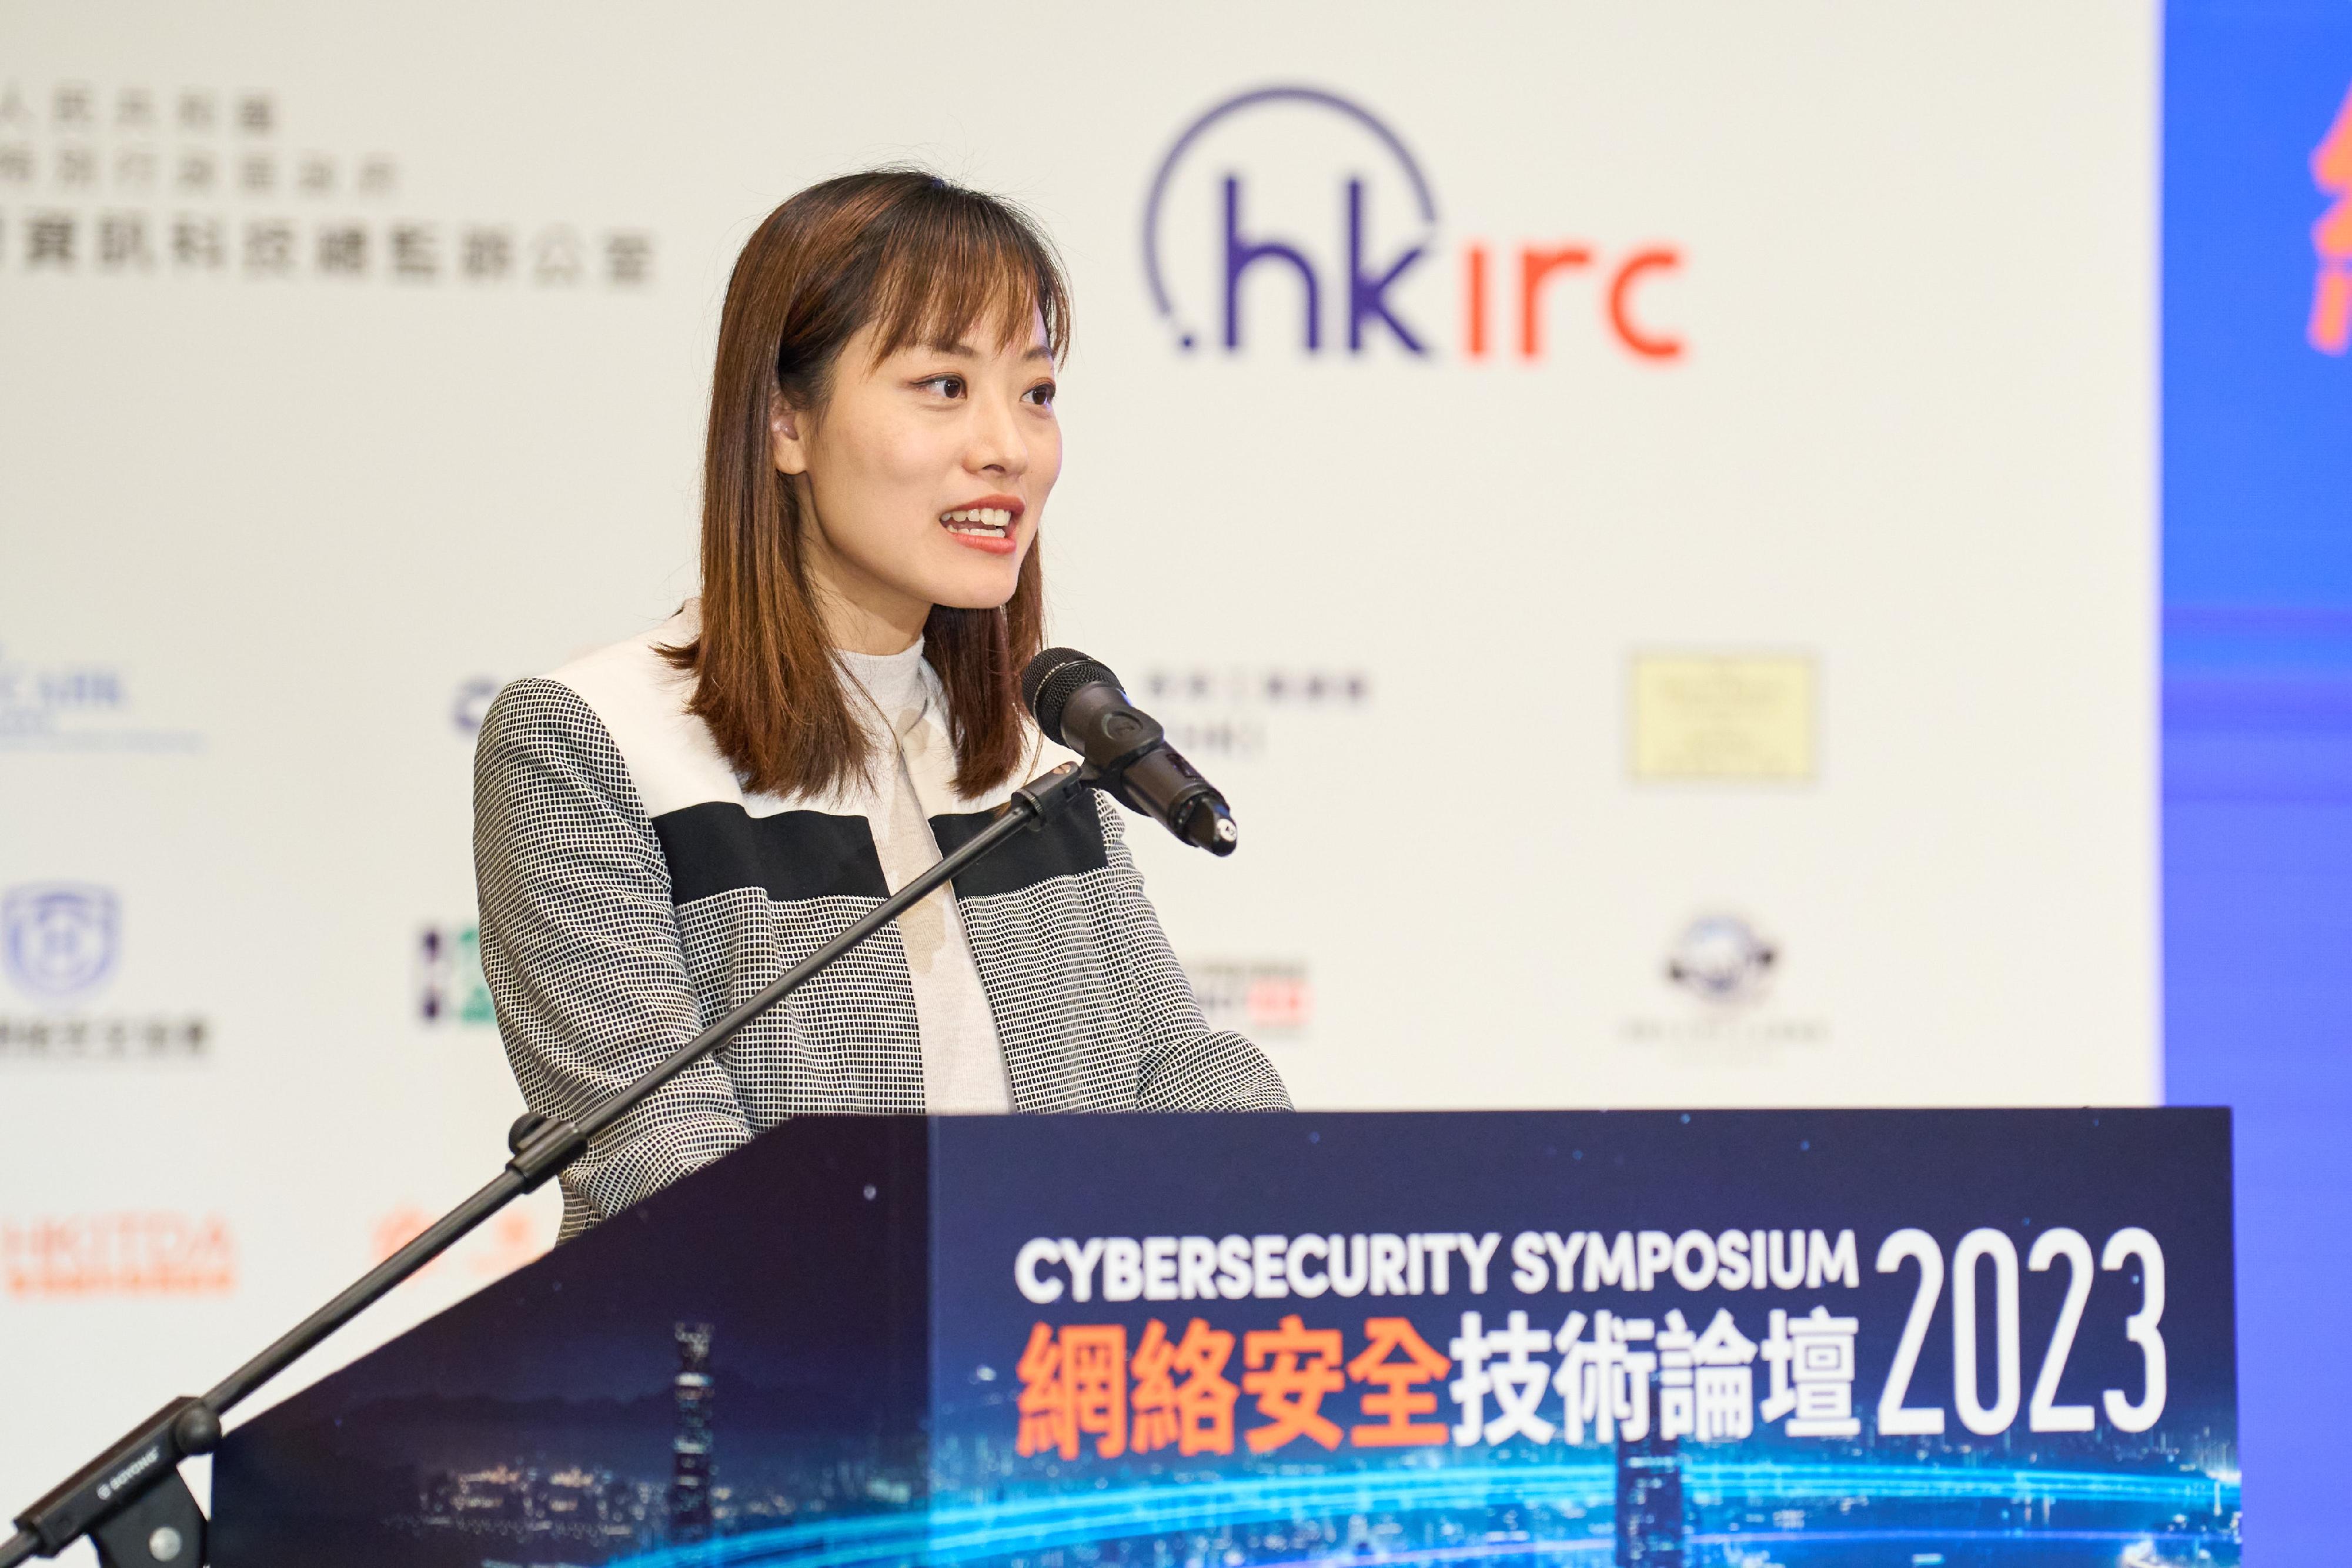 The Under Secretary for Innovation, Technology and Industry, Ms Lillian Cheong, delivers the closing remarks at the Cybersecurity Symposium 2023 today (December 14).